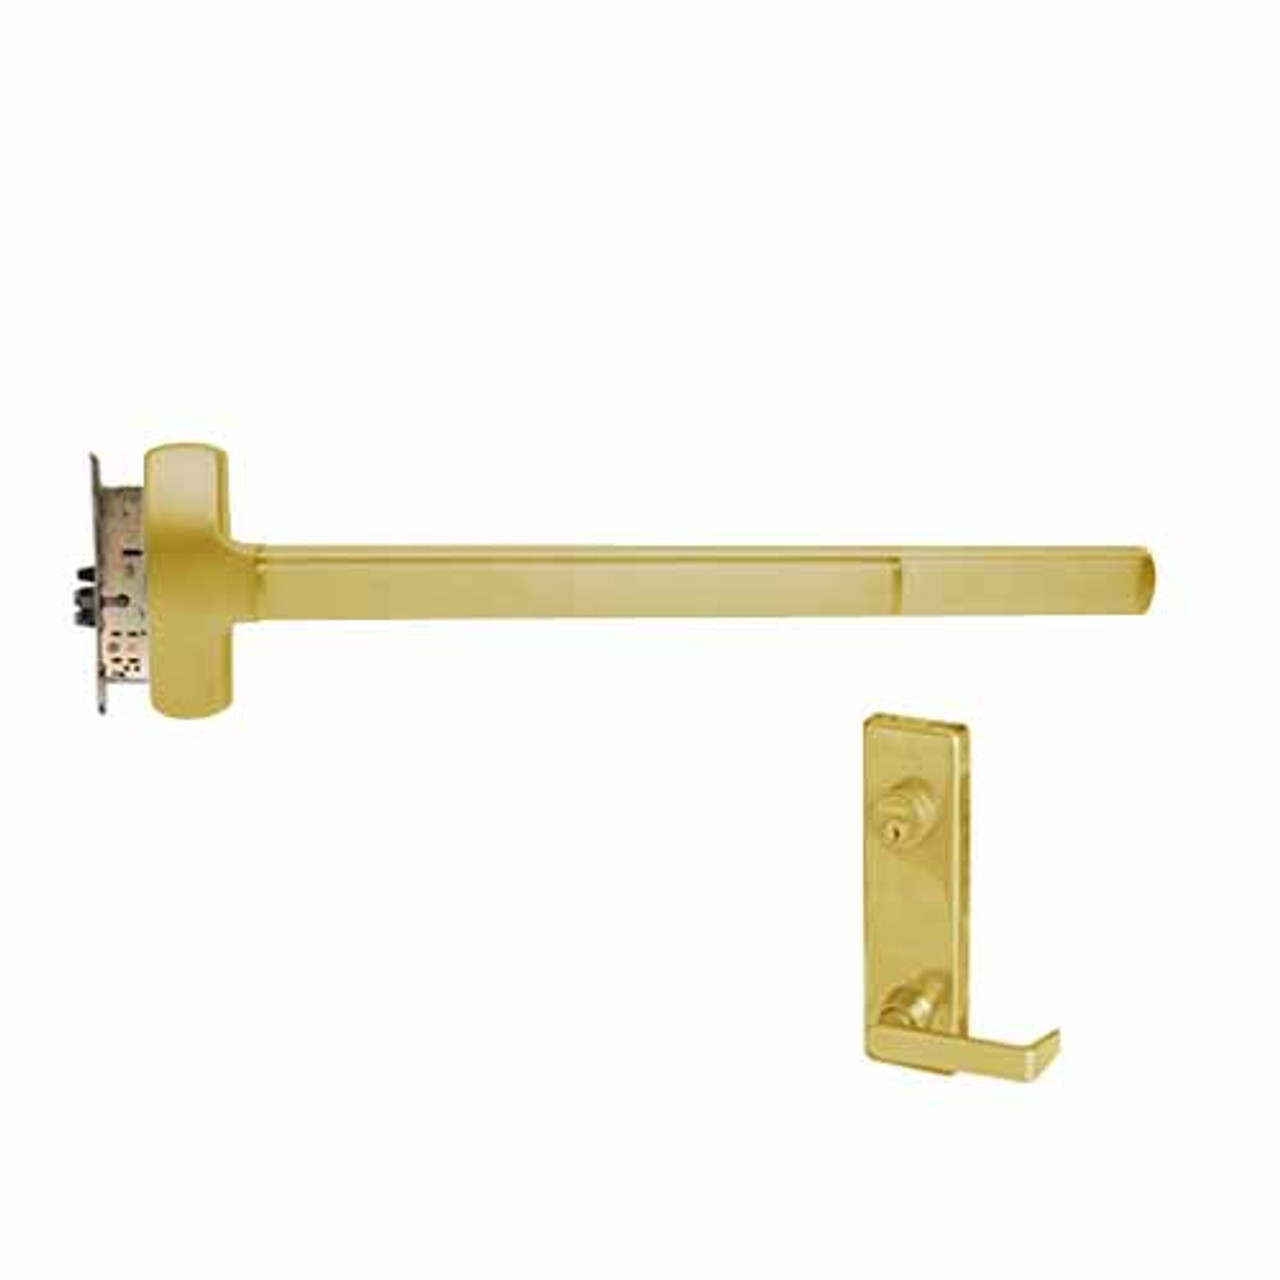 F-25-M-L-Dane-US3-4-LHR Falcon Exit Device in Polished Brass